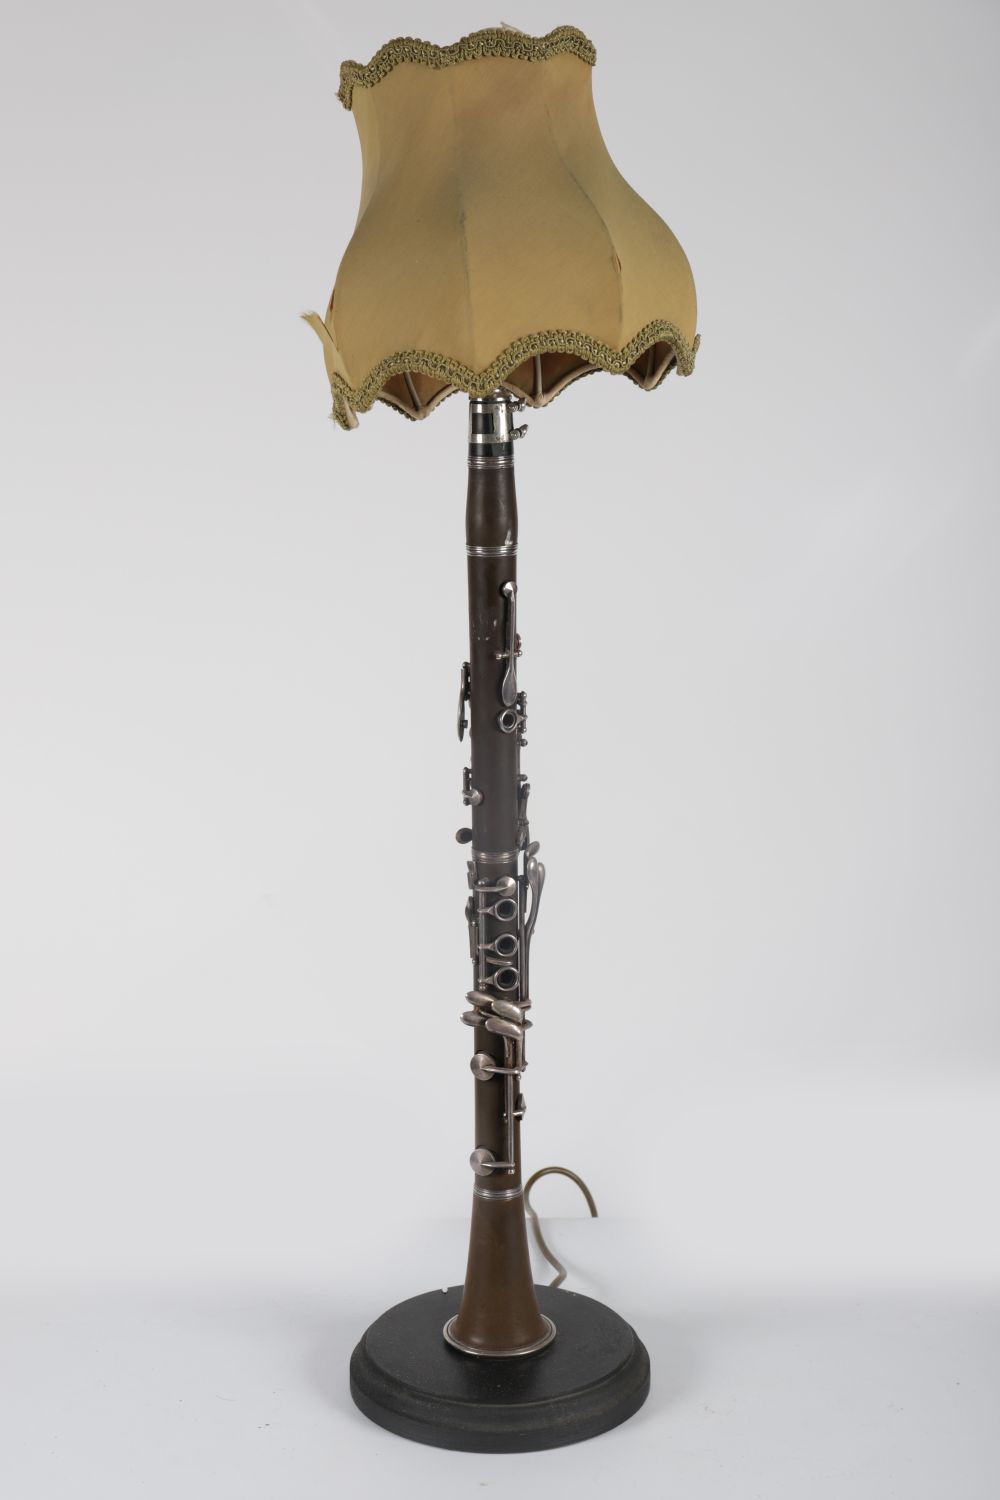 CLARINET STEMMED TABLE LAMP